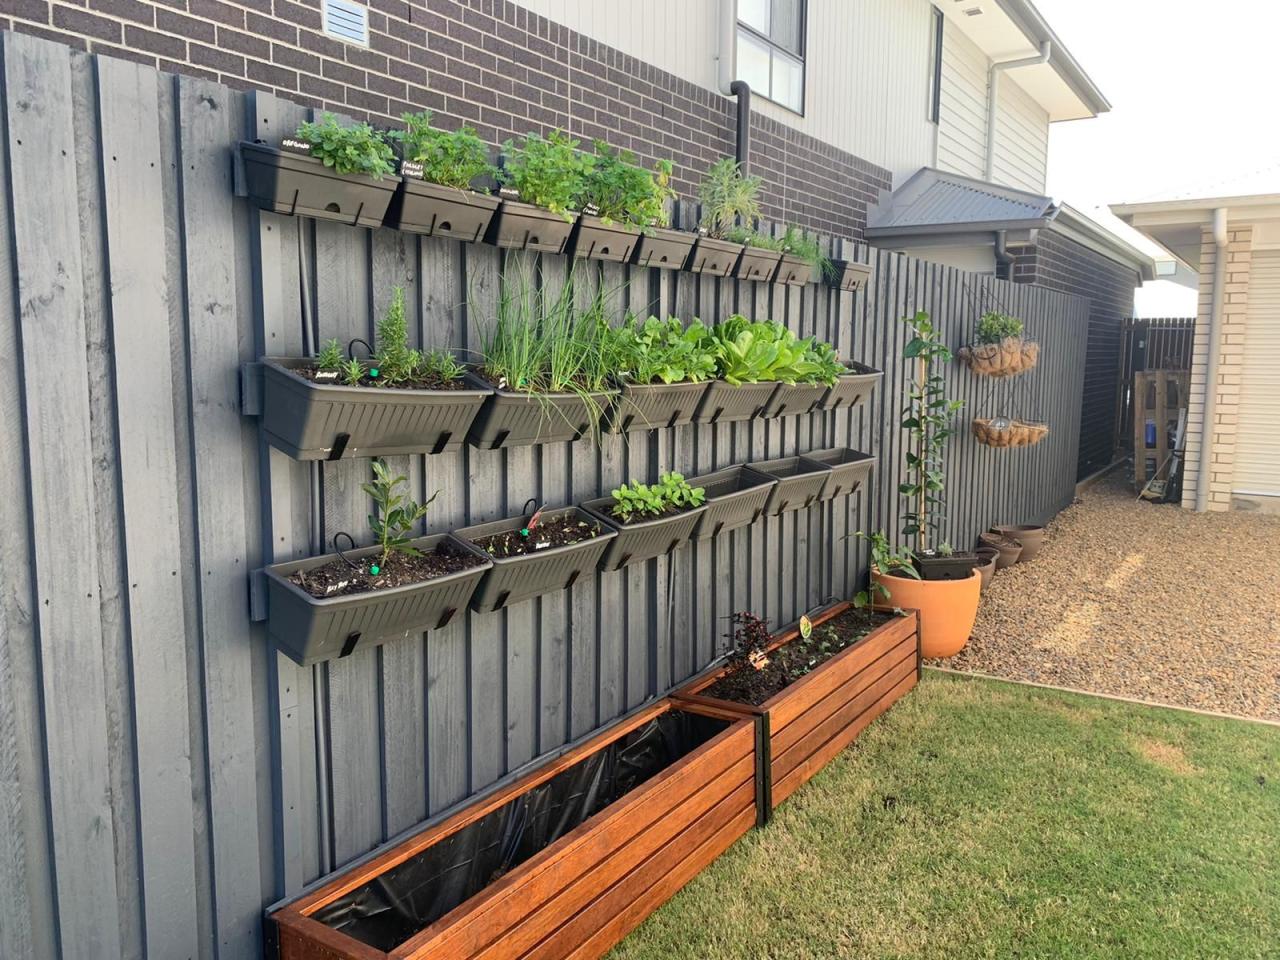 Hanging Plants Indoor | Fence Hanging Planters from Bunnings: Enhance Your Outdoor Space with Style